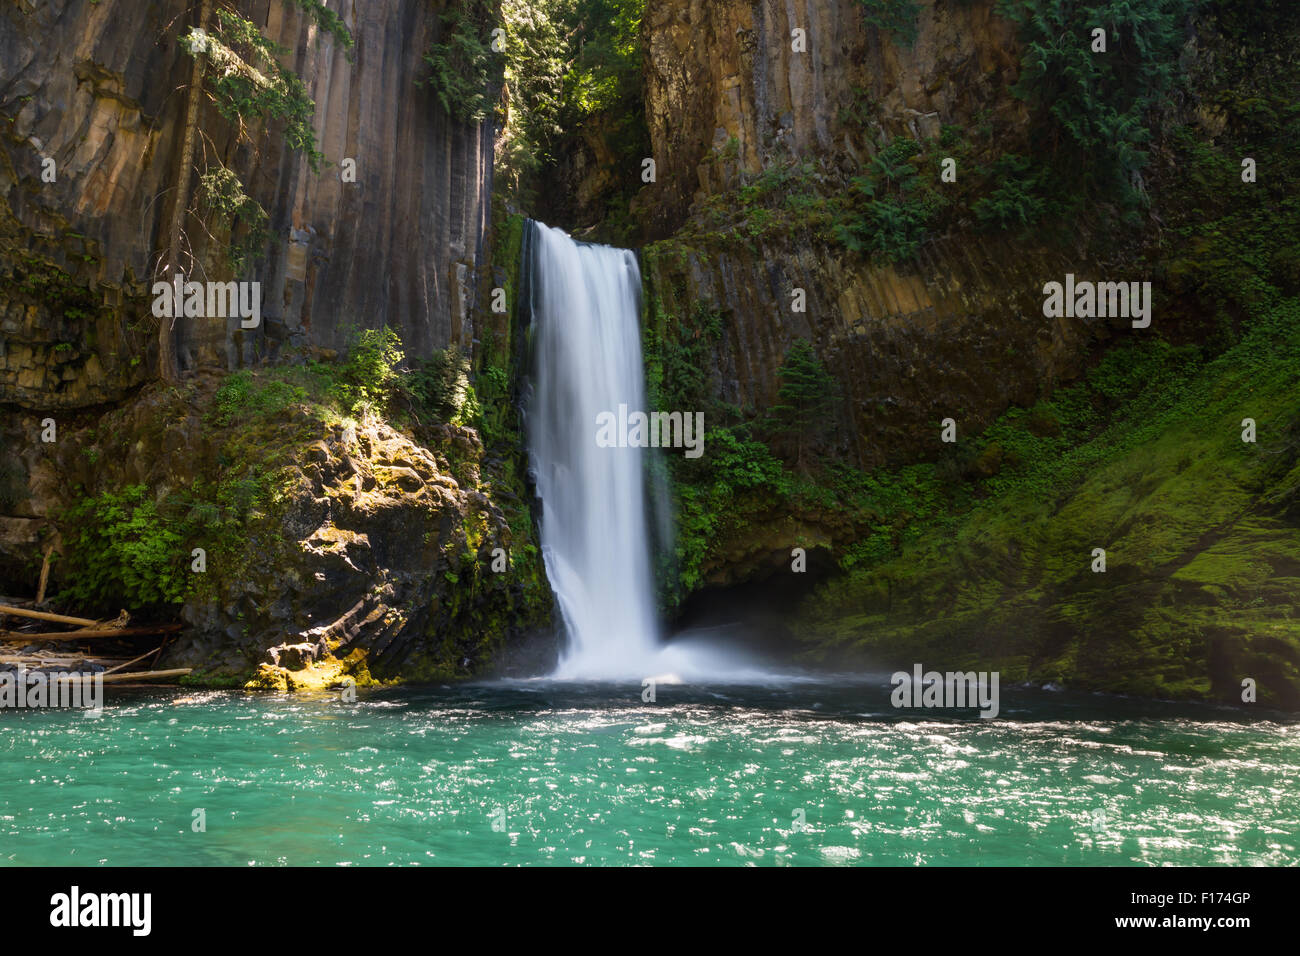 Beautiful Toketee Falls in Oregon, photo taken on a bright clear day with vivid colors Stock Photo